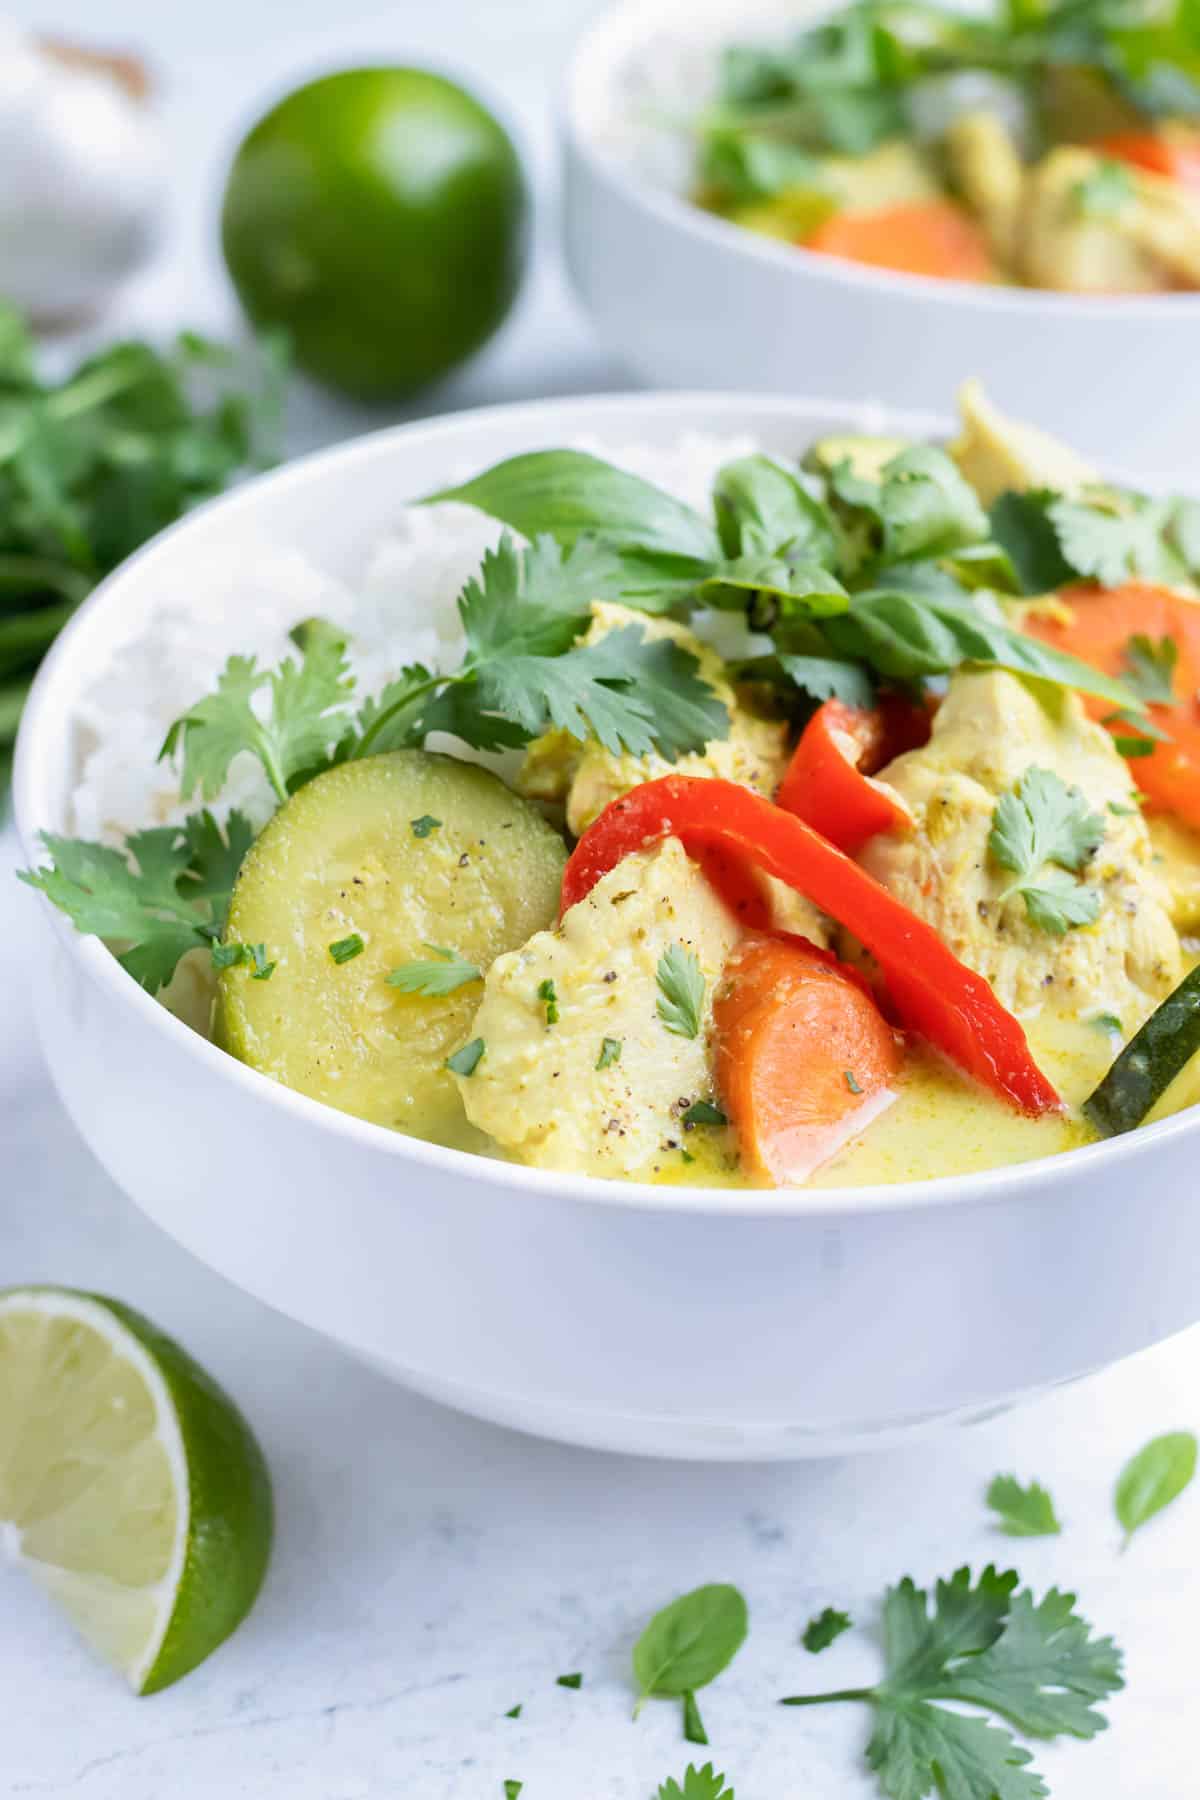 Rice is served with this spicy Thai soup for a gluten-free meal.